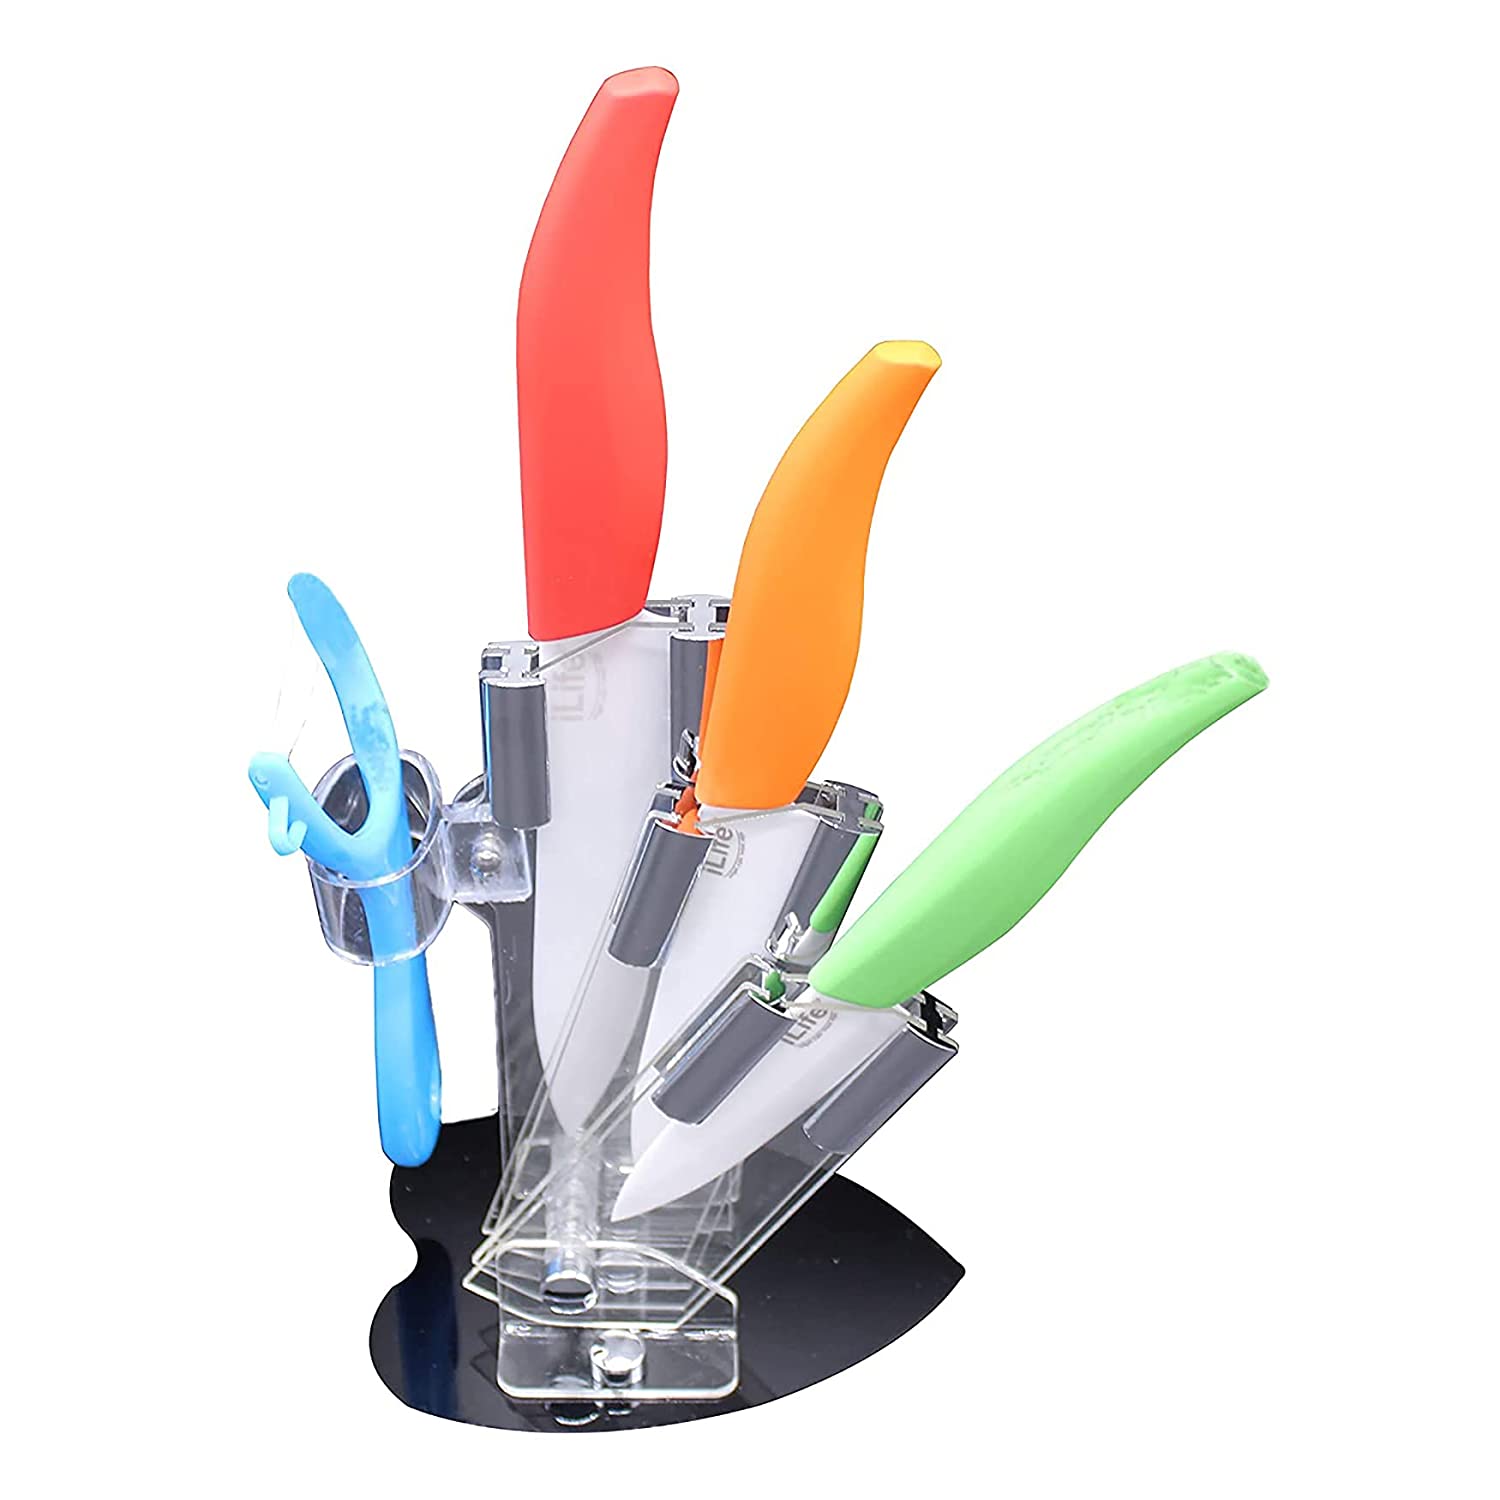 iLife Ceramic Kitchen  Set, 5-Piece Kitchen Cutlery Block  Sets with Fruit Peeler & an Acrylic Stand (Multi Color)